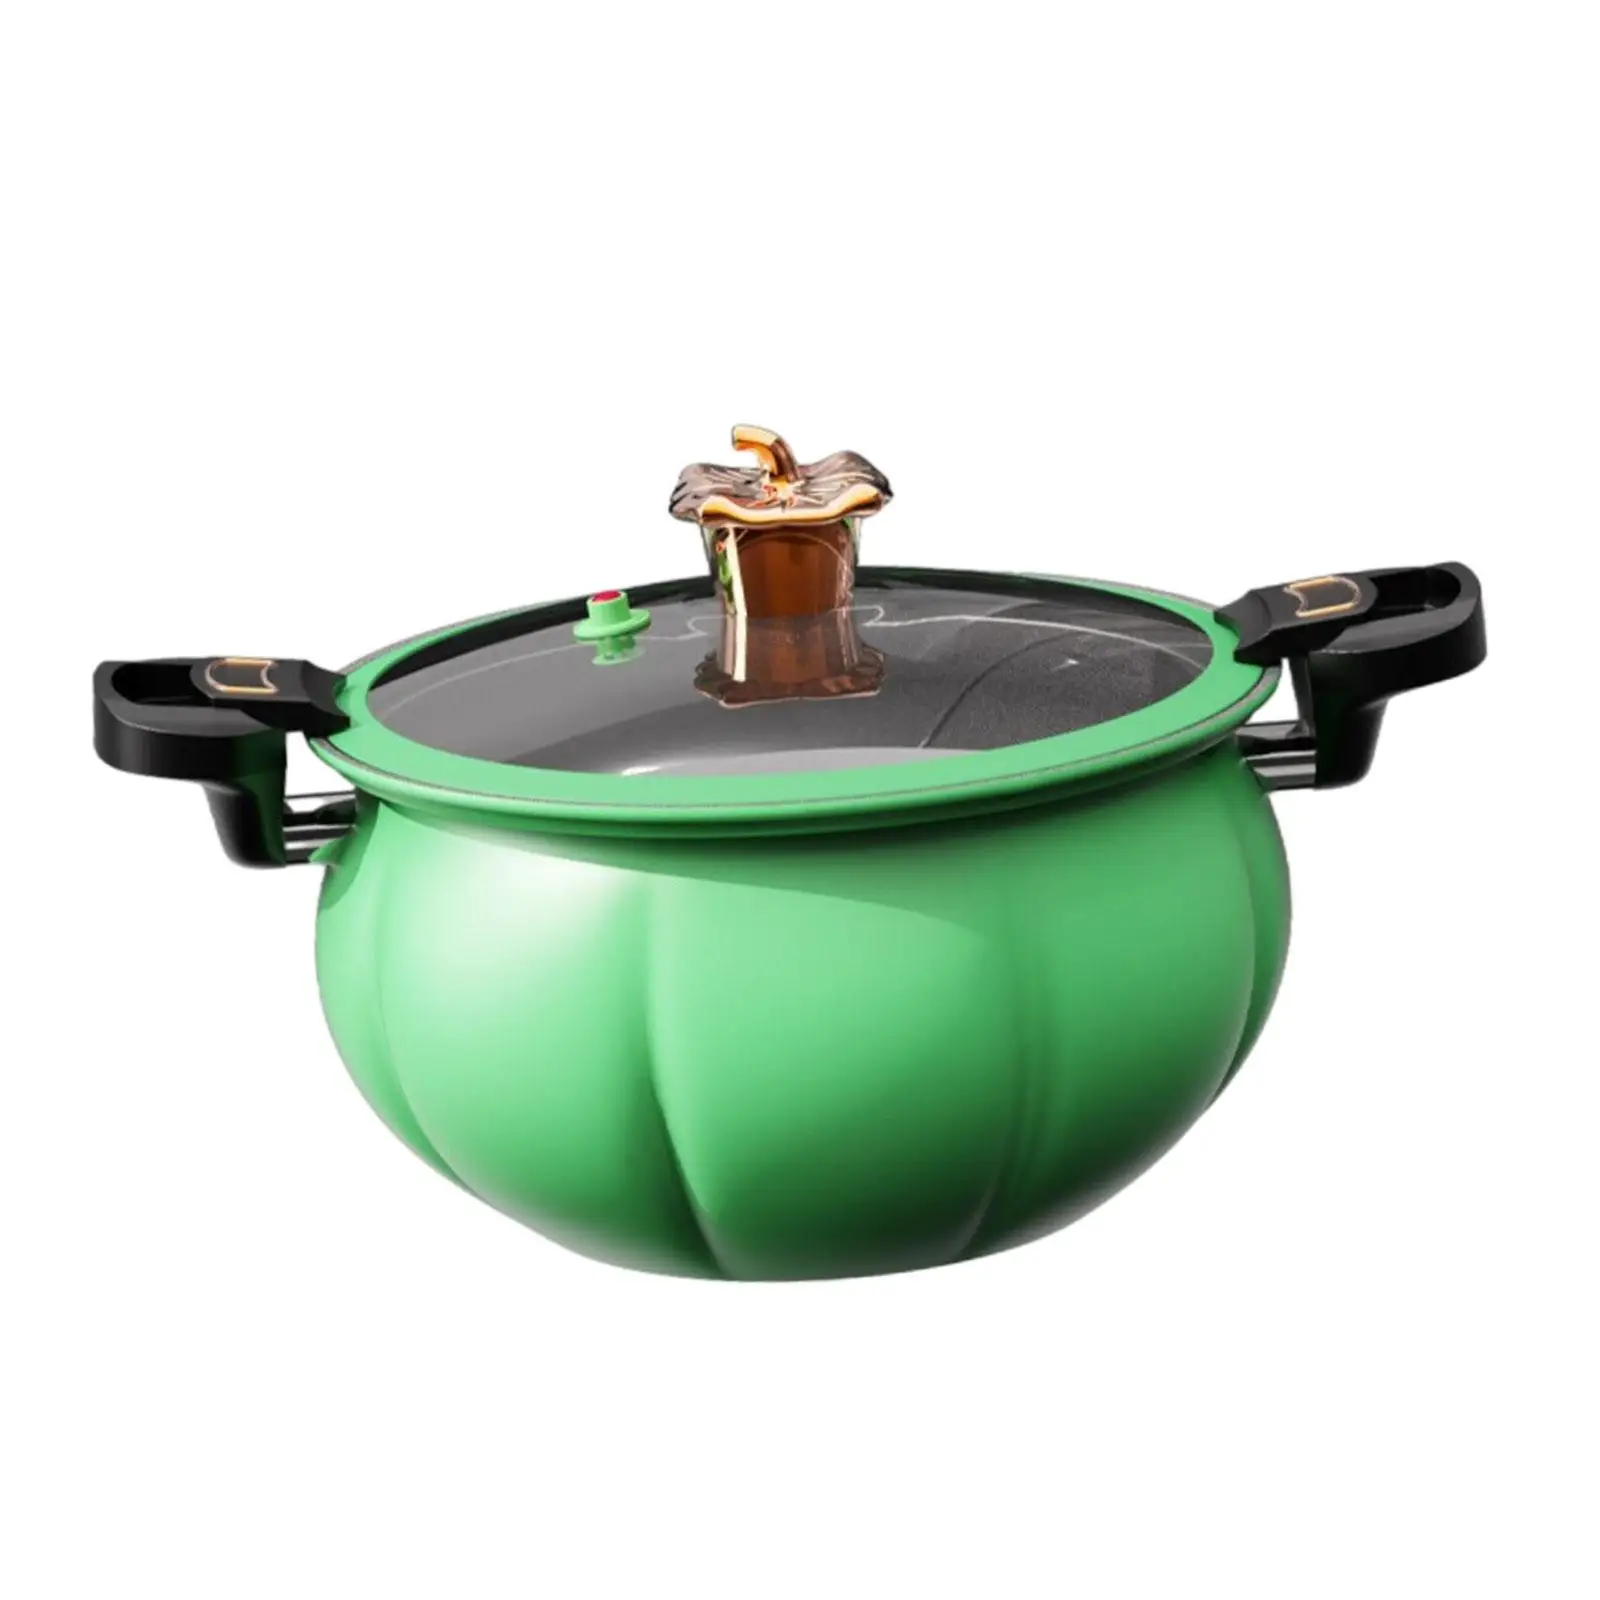 Soup Pot Pumpkin Shaped Hot Pot with Cover Slow Cooker Easy Clean Saucepan with Lid for Tea Food Soup Pasta Noodle Cereals